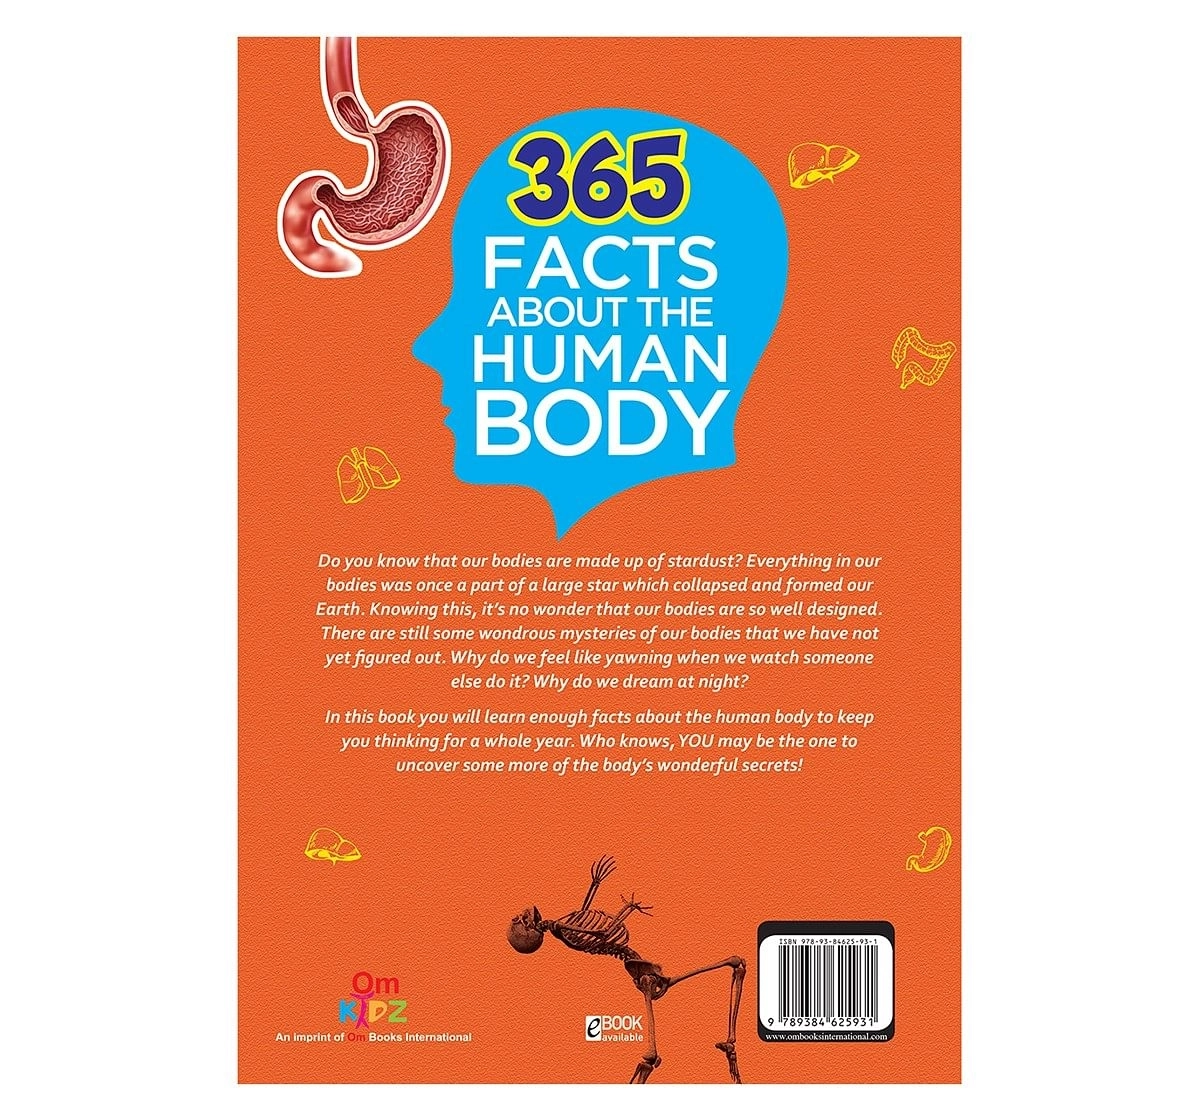 Om Books: 365 Facts About the Human Body, 236 Pages, Hardcover